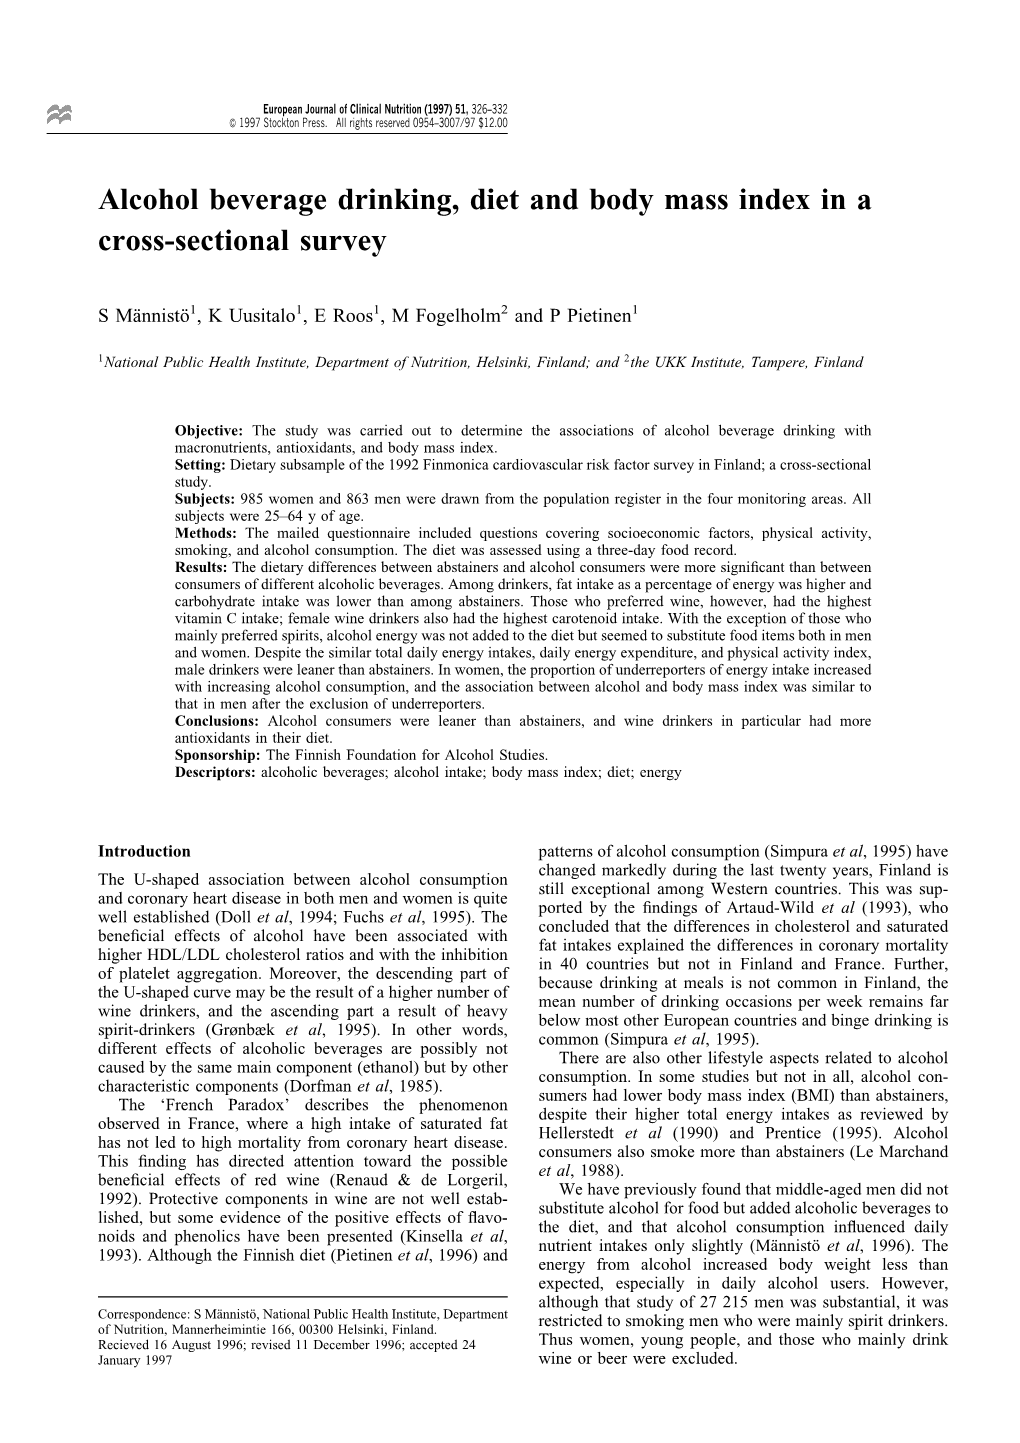 Alcohol Beverage Drinking, Diet and Body Mass Index in a Cross-Sectional Survey